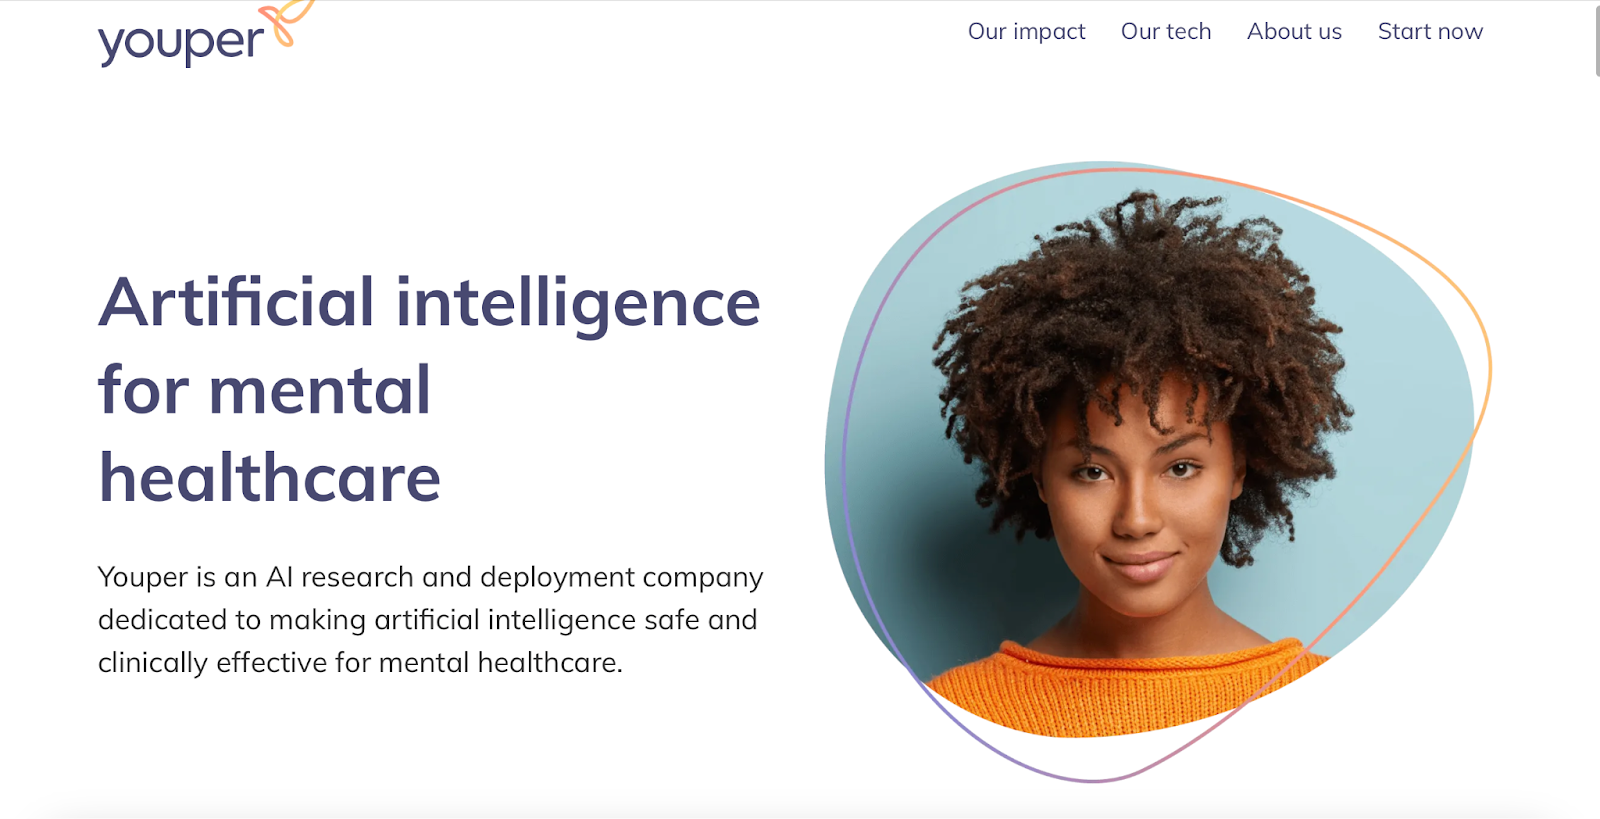 The Youper homepage that states it is 'artificial intelligence for mental healthcare'.